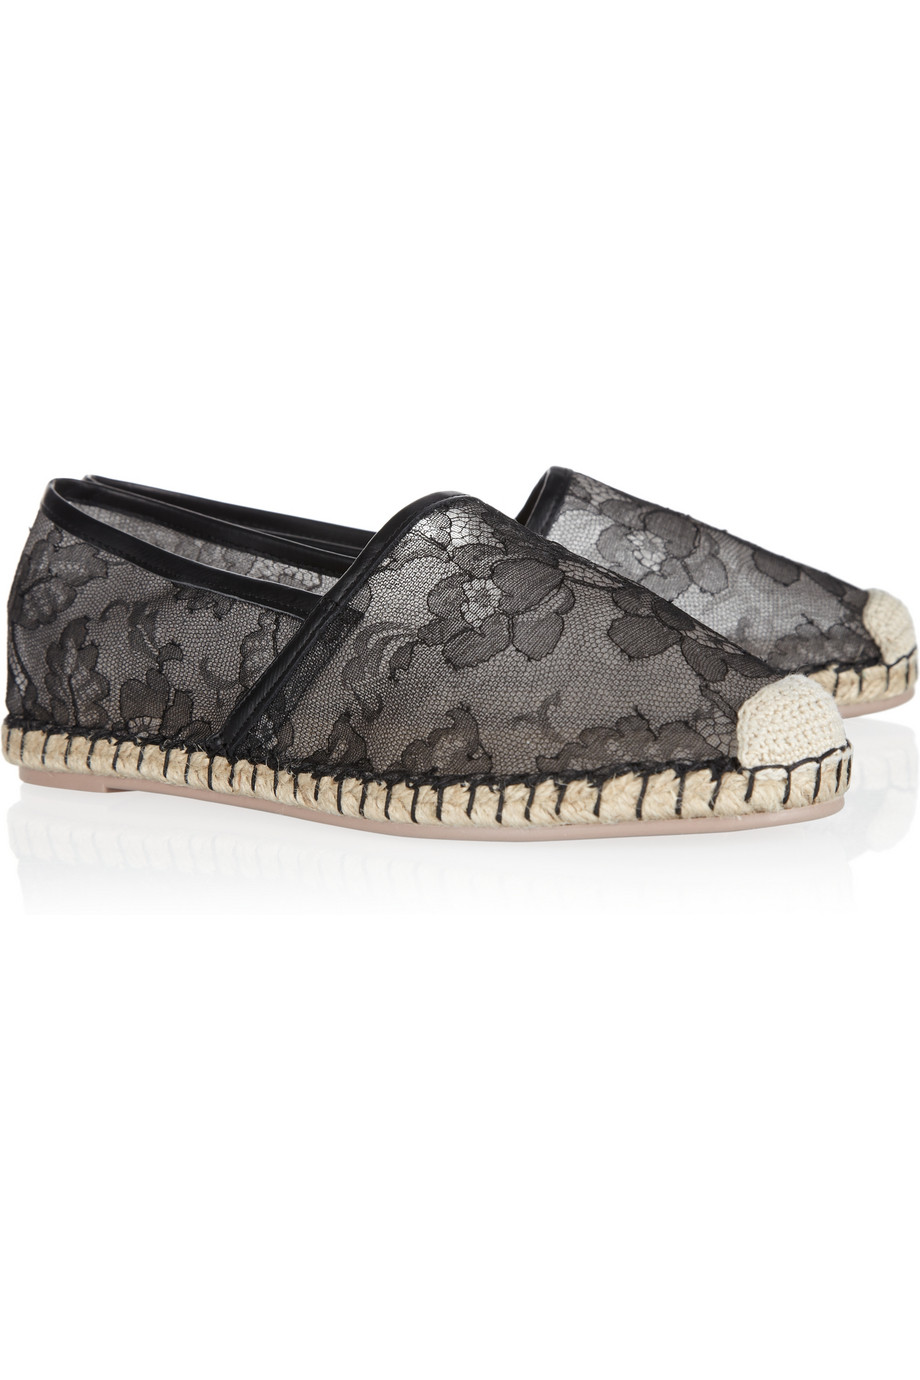 Valentino Leather and Lace Espadrilles in Black | Lyst